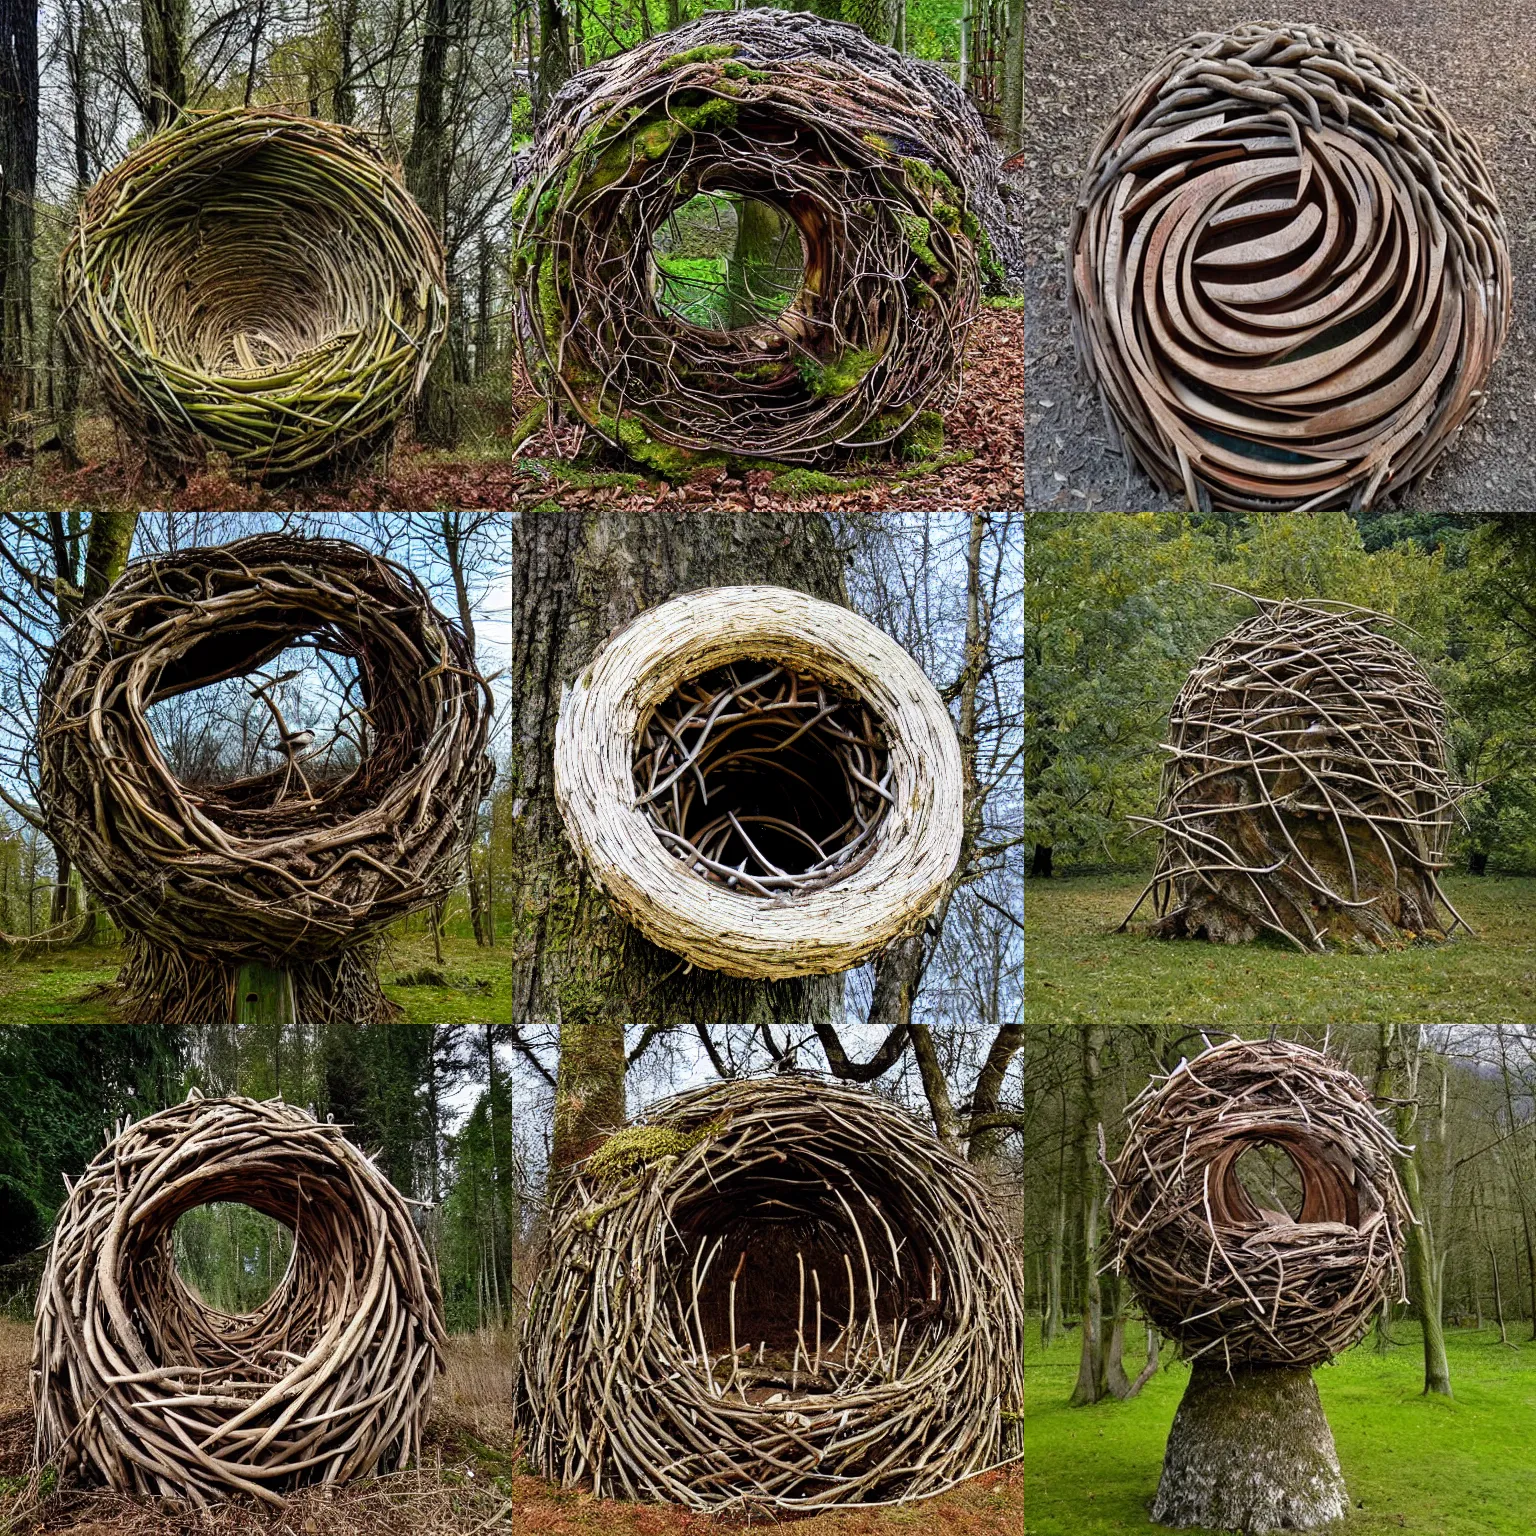 Prompt: an environment art sculpture by Nils-Udo, leaves twigs wood, nature, natural, round form, a Bird nesting inside the structure, leaf spiral patterns around outside of structure